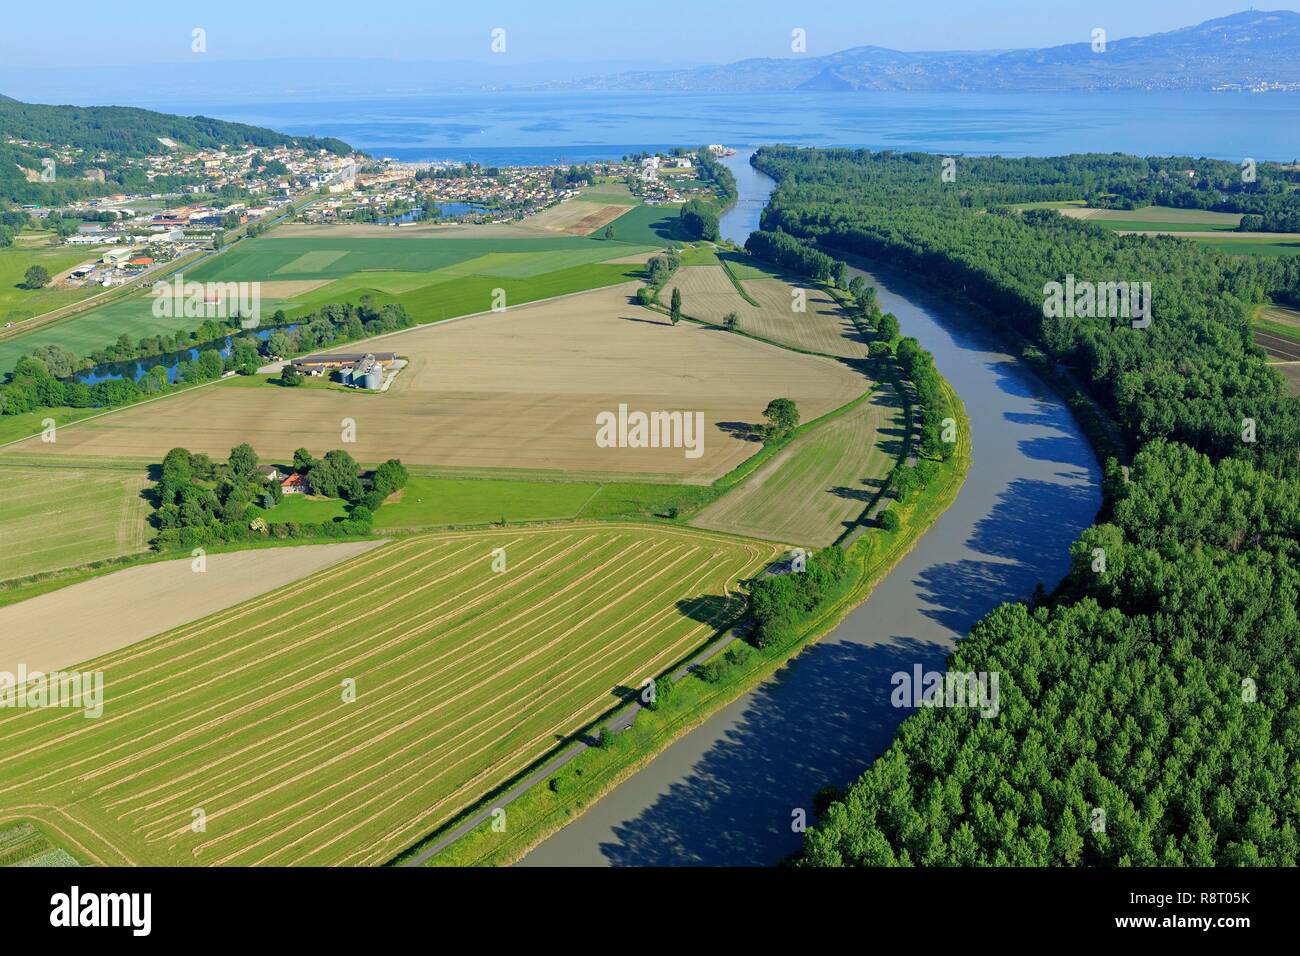 Switzerland, Valais canton, Monthey district, Port Valais, The Rhone, Lake Geneva in the background (aerial view) Stock Photo